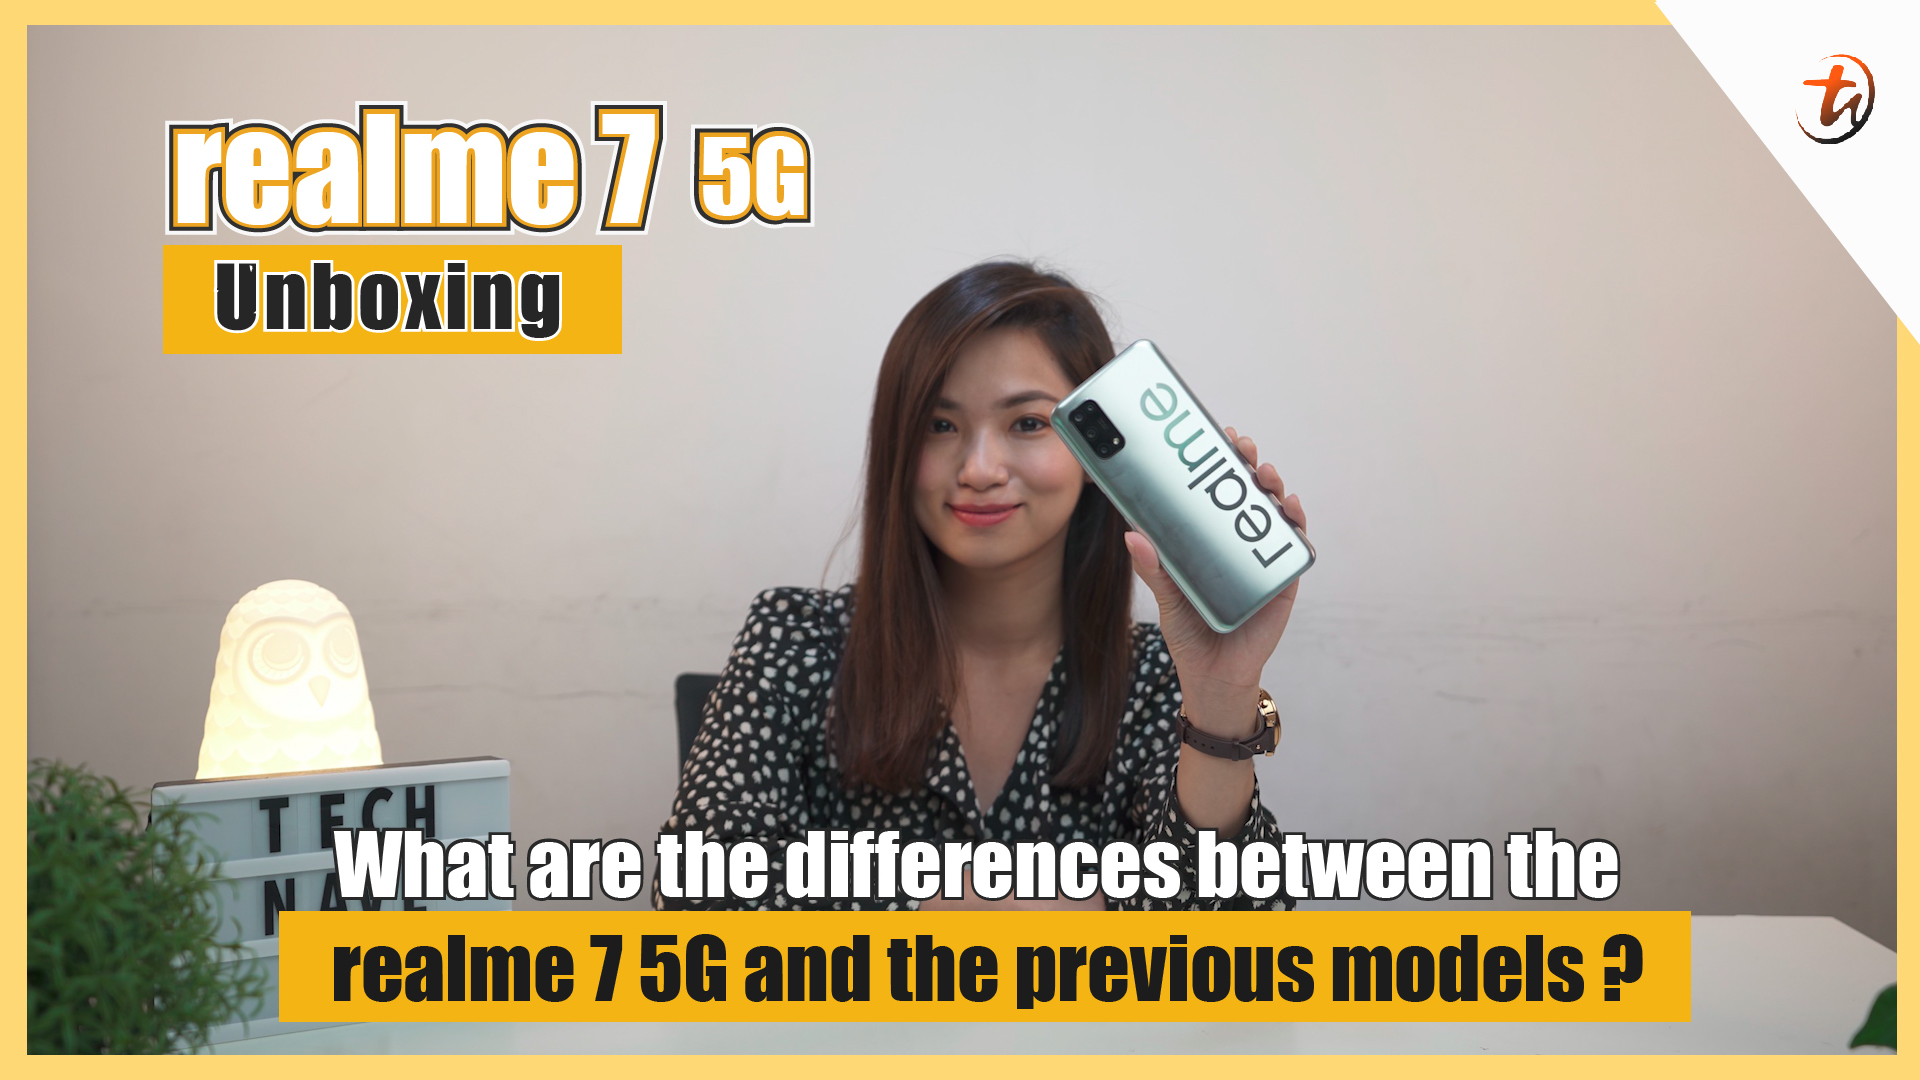 realme 7 5G - Is it worth buying? | TechNave Unboxing and Hands-On Video